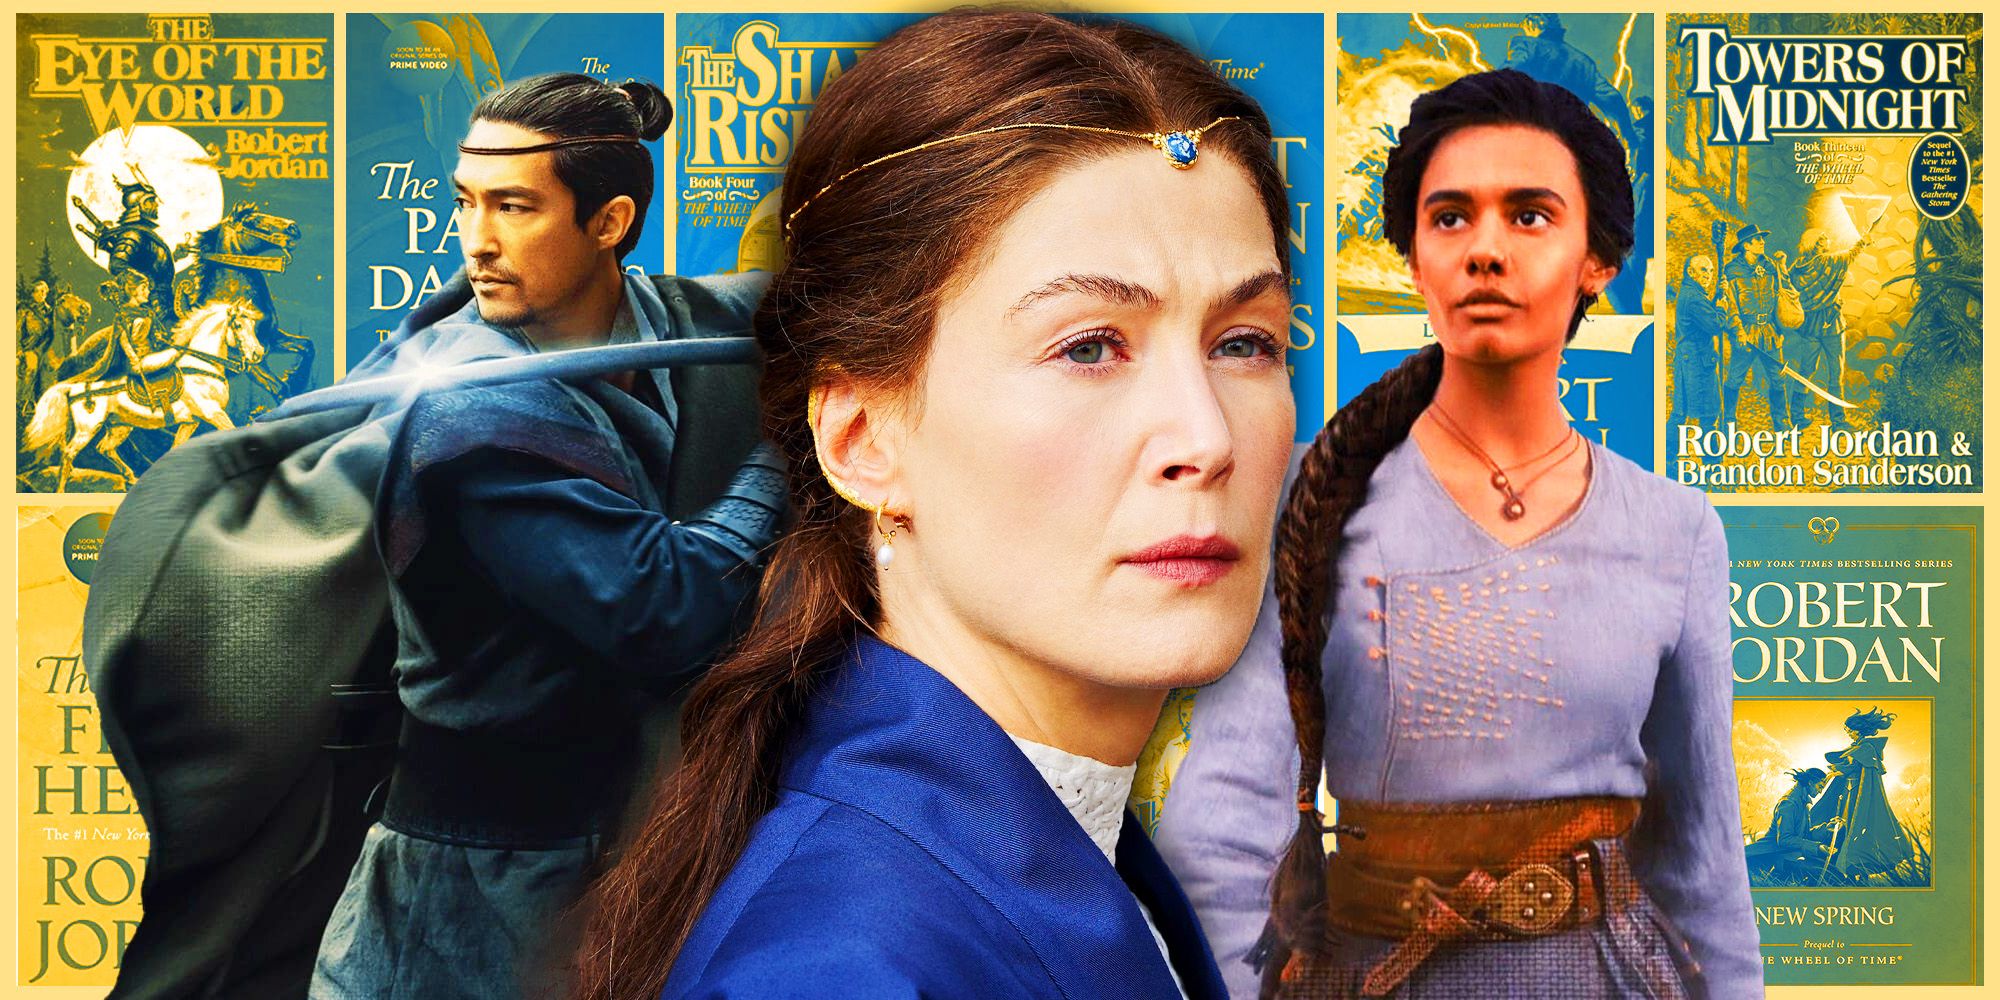 Rosamund Pike and Daniel Henney and Madeleine Madden from The Wheel of Time